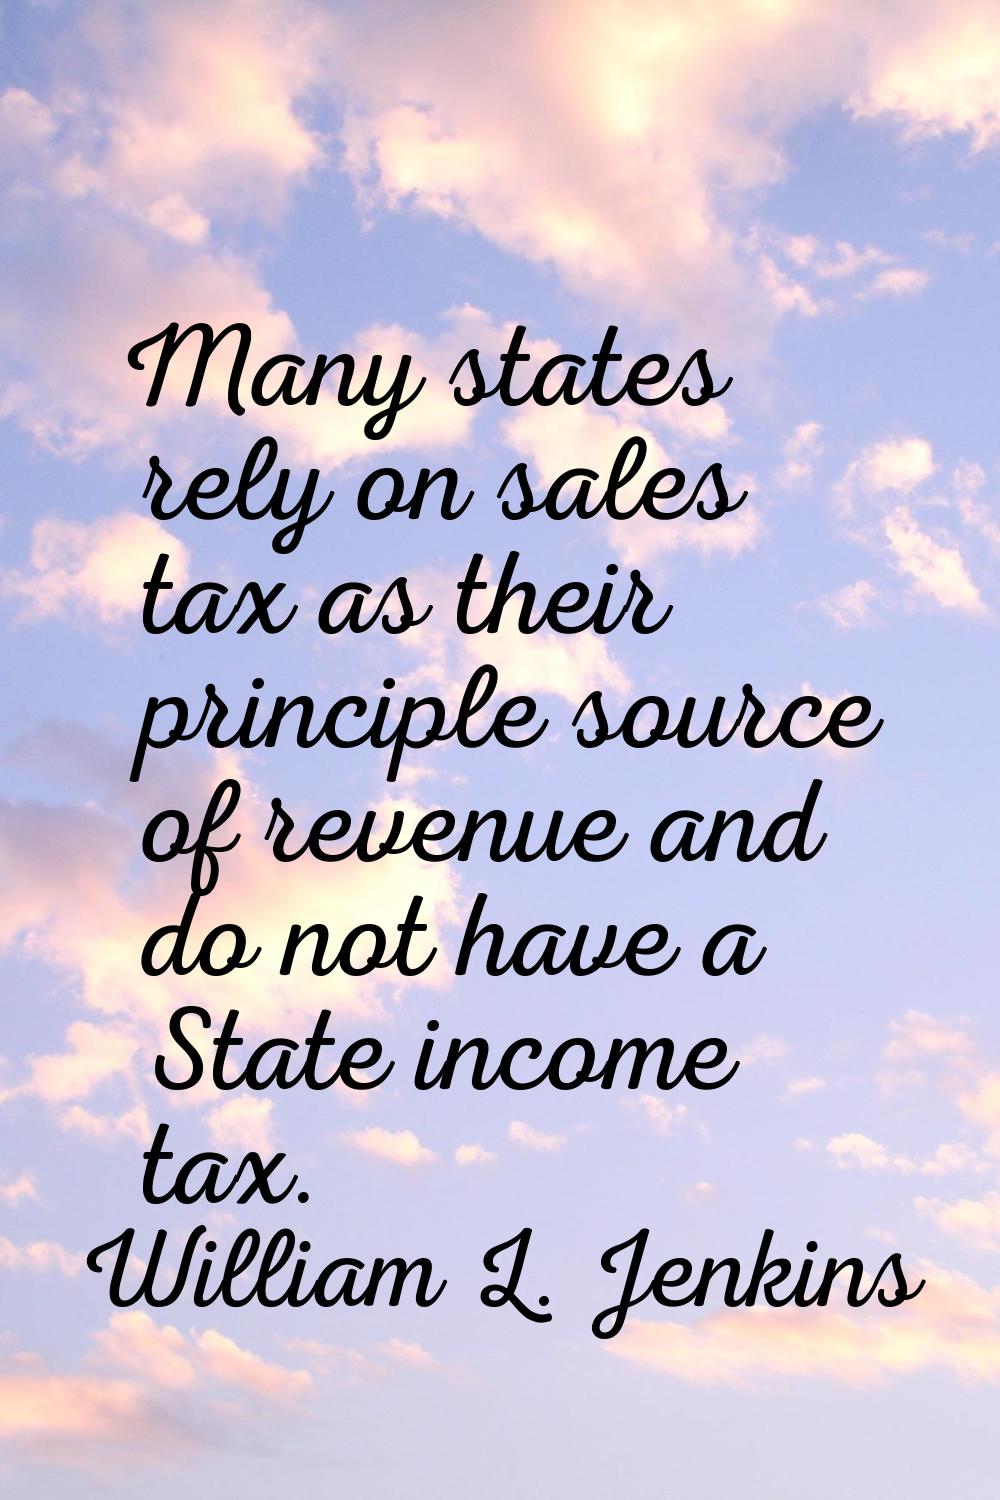 Many states rely on sales tax as their principle source of revenue and do not have a State income t